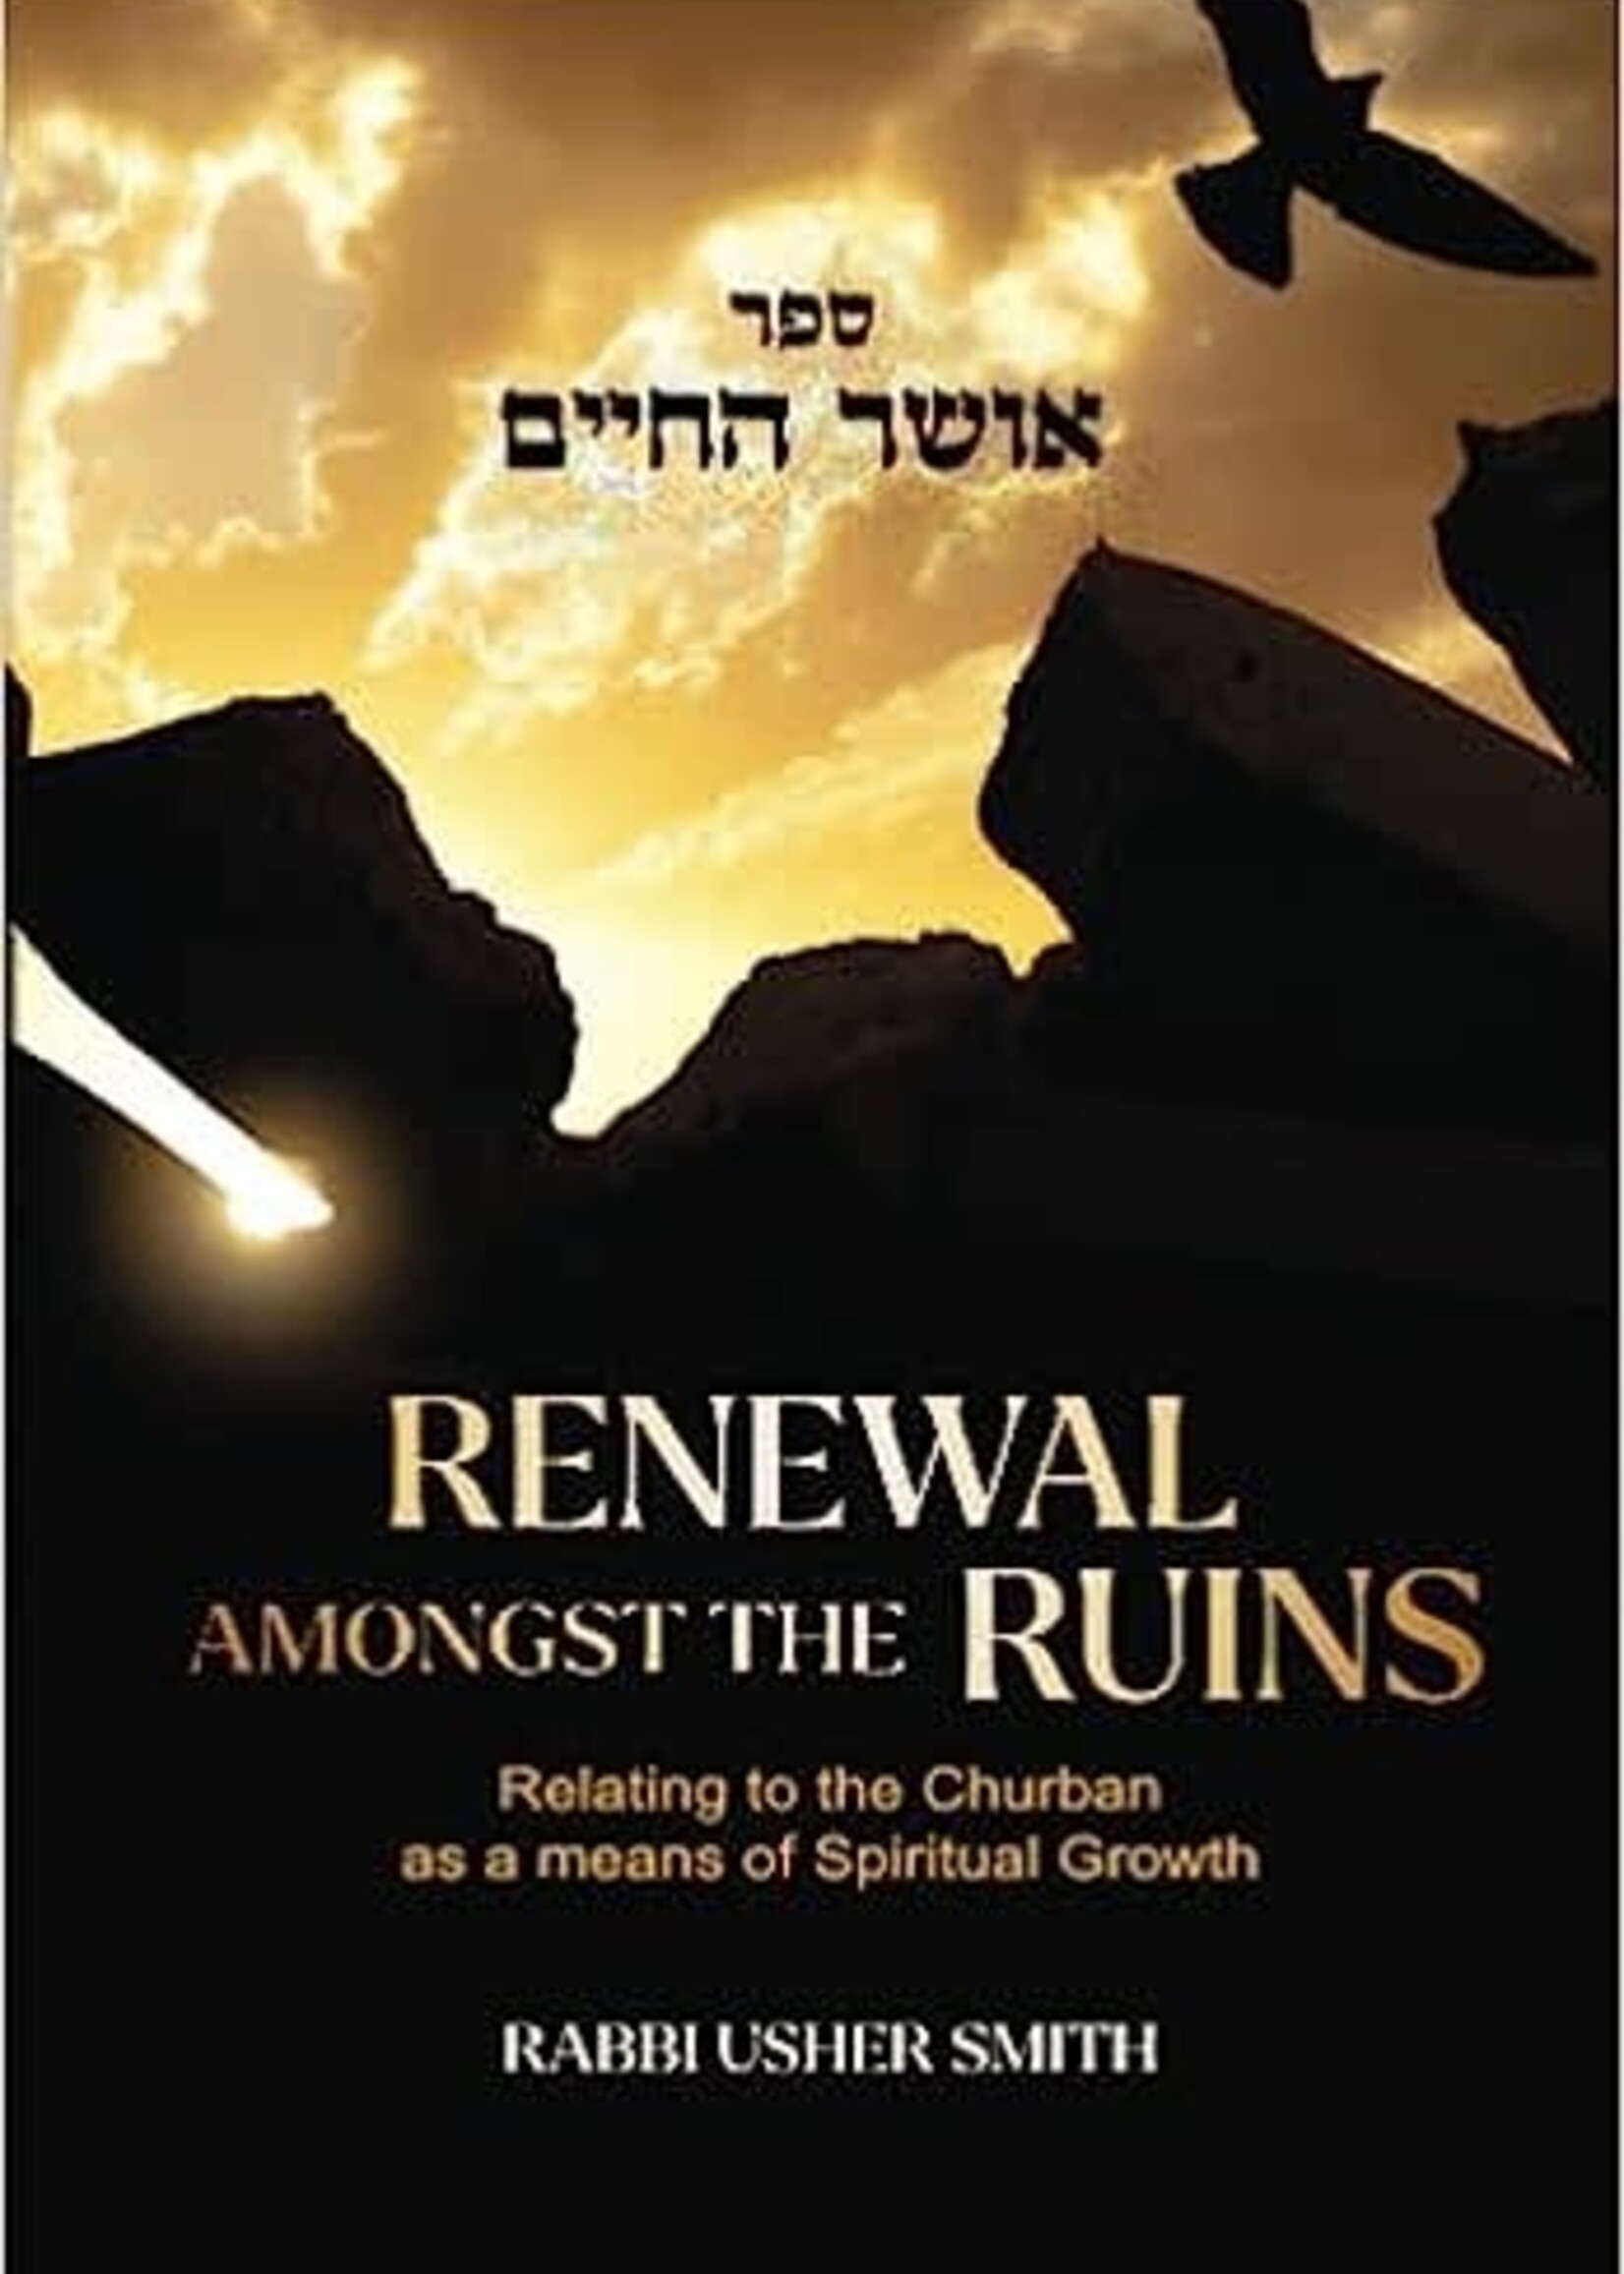 Rabbi Usher Smith Renewal Amongs the Ruins - Relating to the Churban as a means of Spiritual Growth